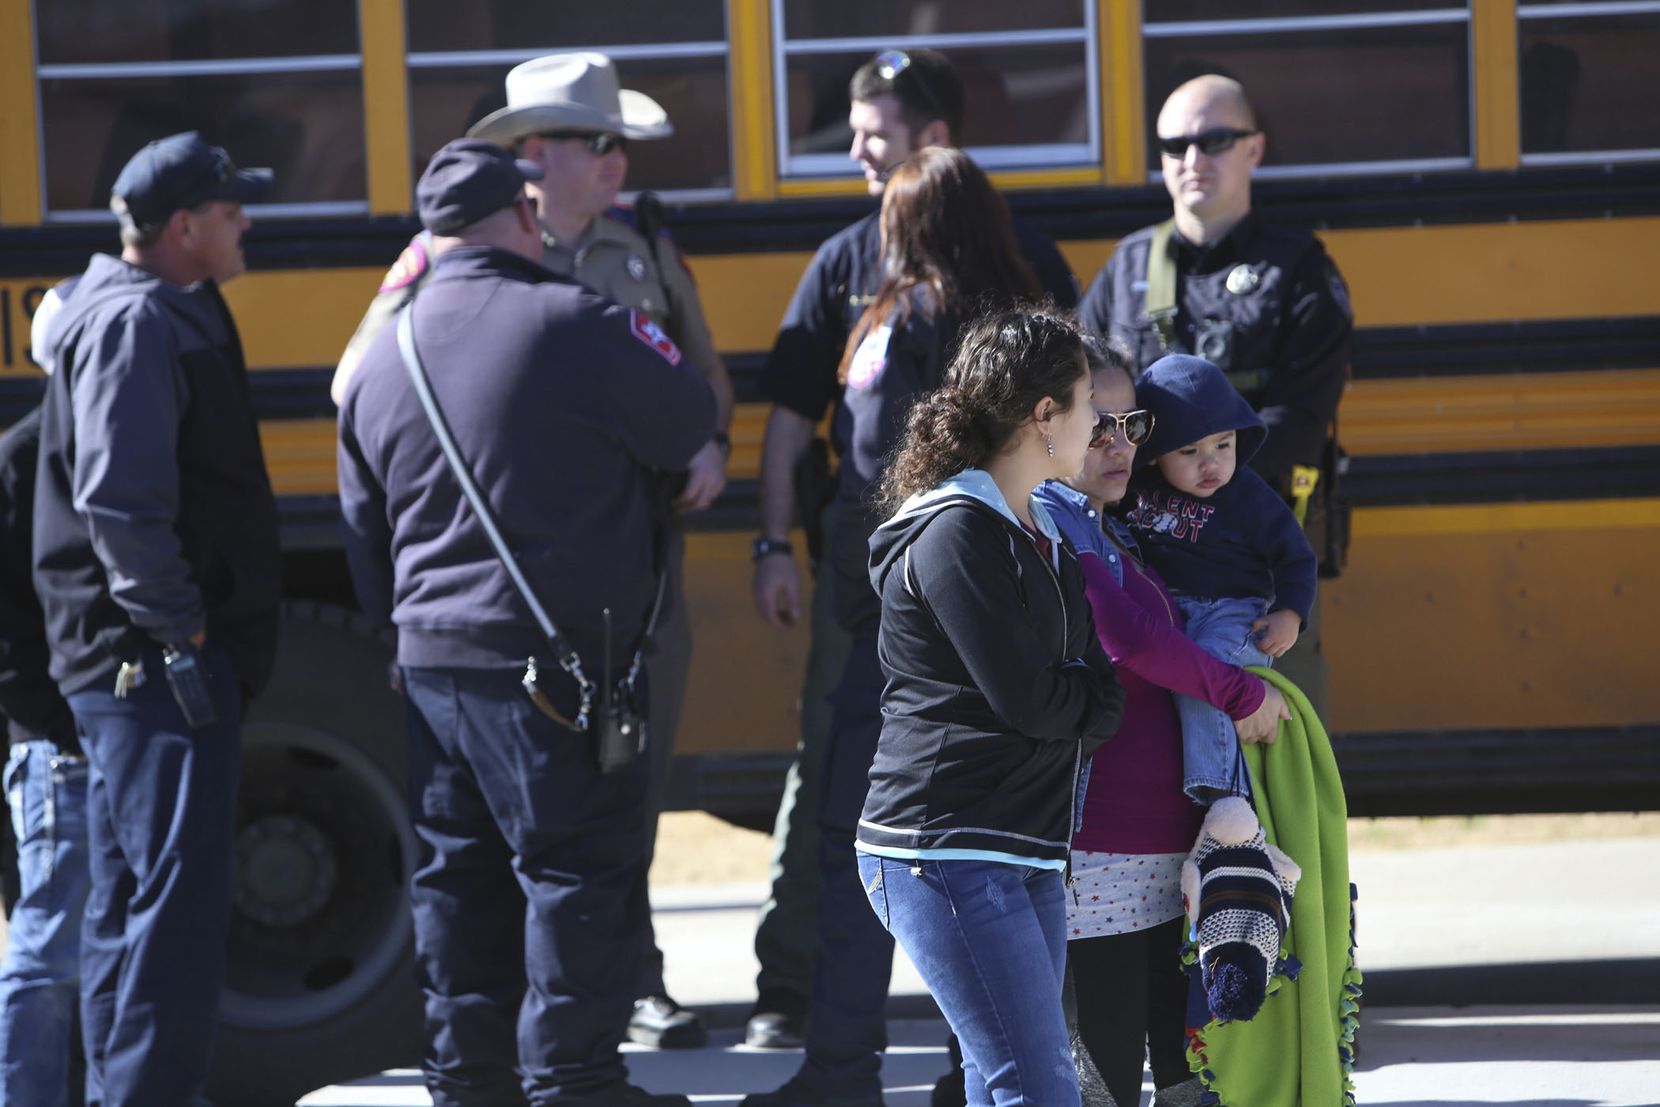 Parents pick up their children from Stafford Elementary School after a high school shooting in Italy on Monday January 22, 2018, in Italy, Texas.  (Photo Â© Chris McGathey)